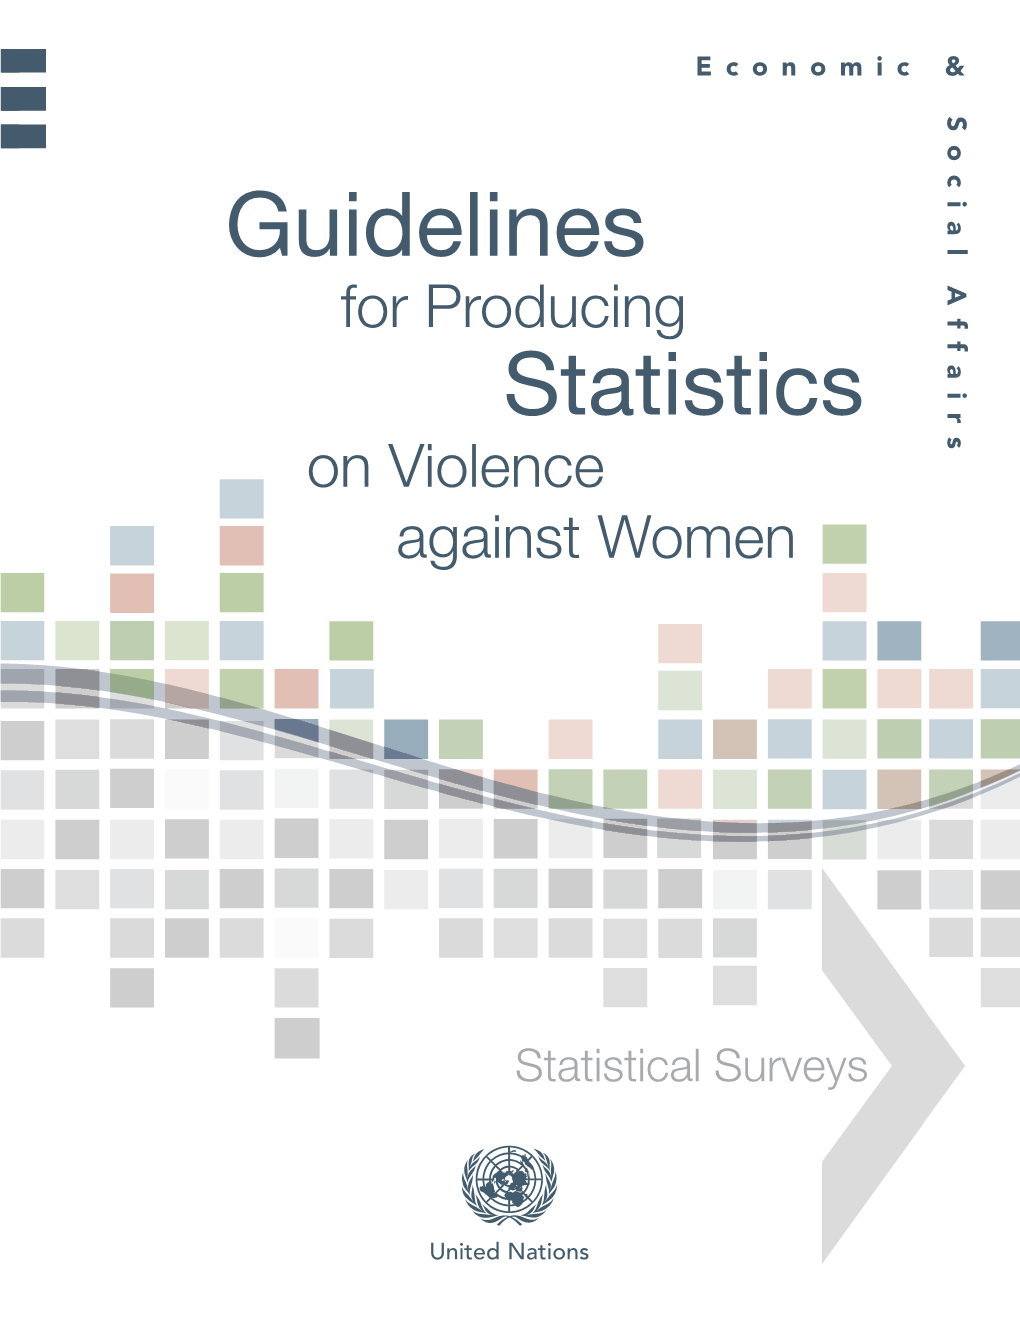 Guidelines for Producing Statistics on Violence Against Women